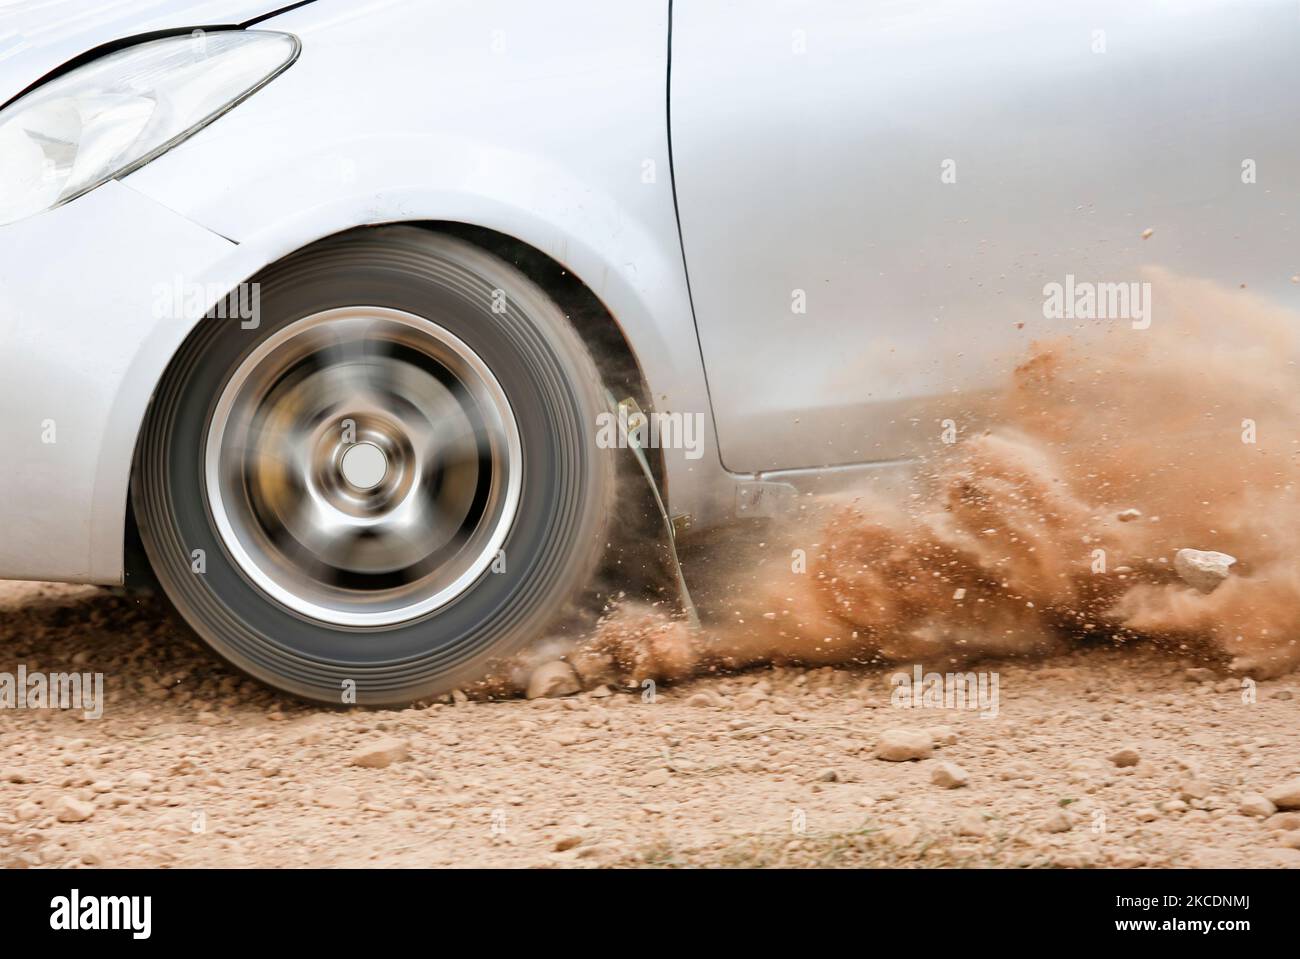 Rally Car in dirt track Stock Photo